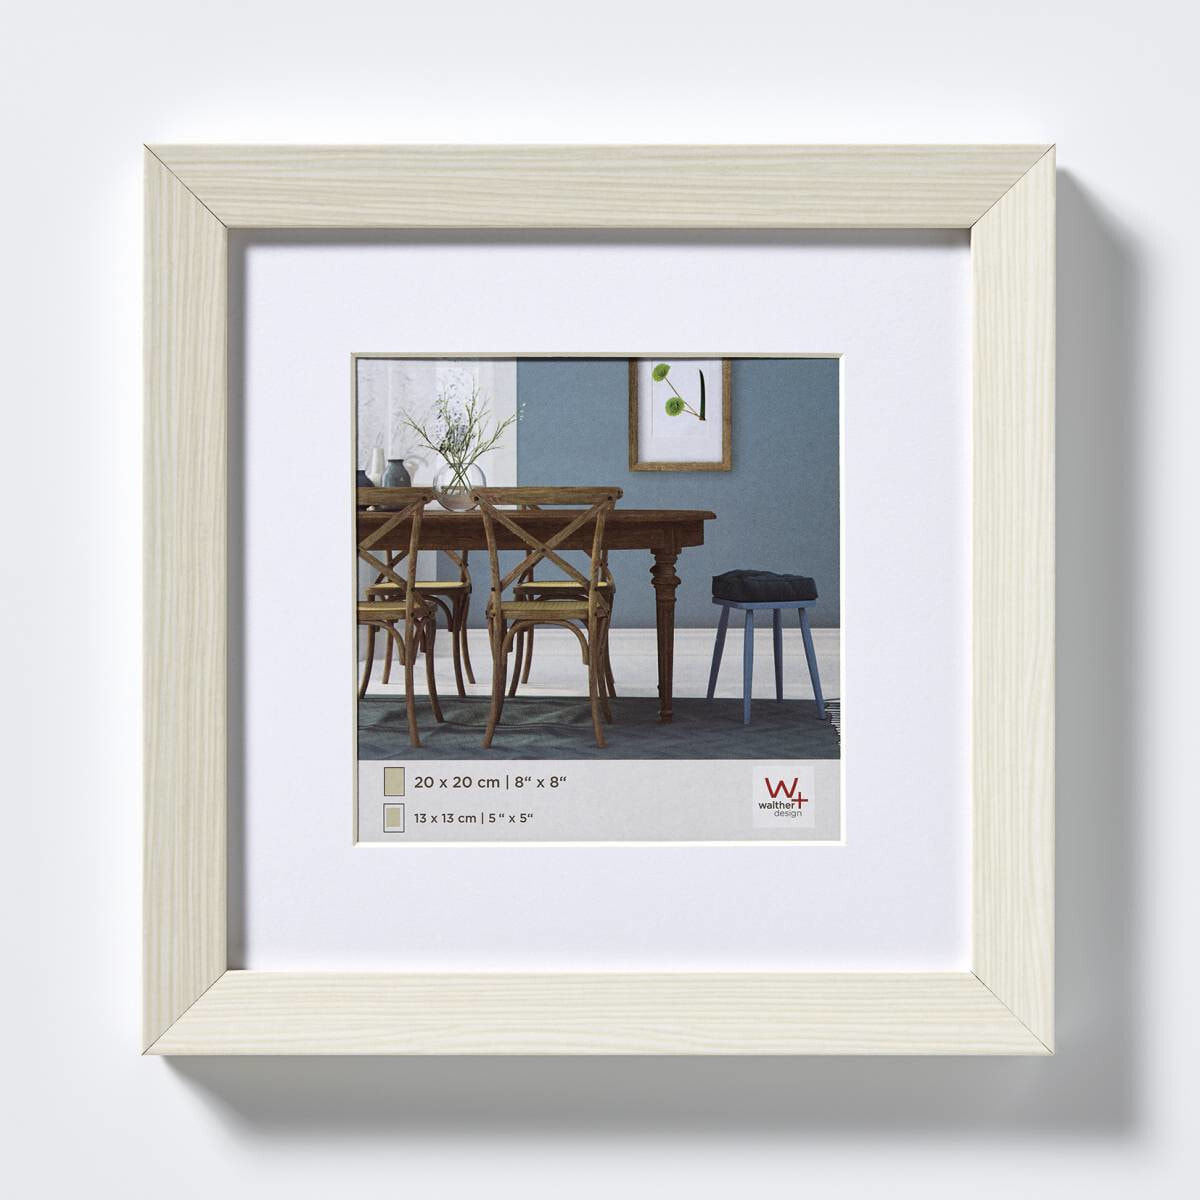 Walther EF220W - MDF - White - Single picture frame - Wall - 13 x 13 cm - Square